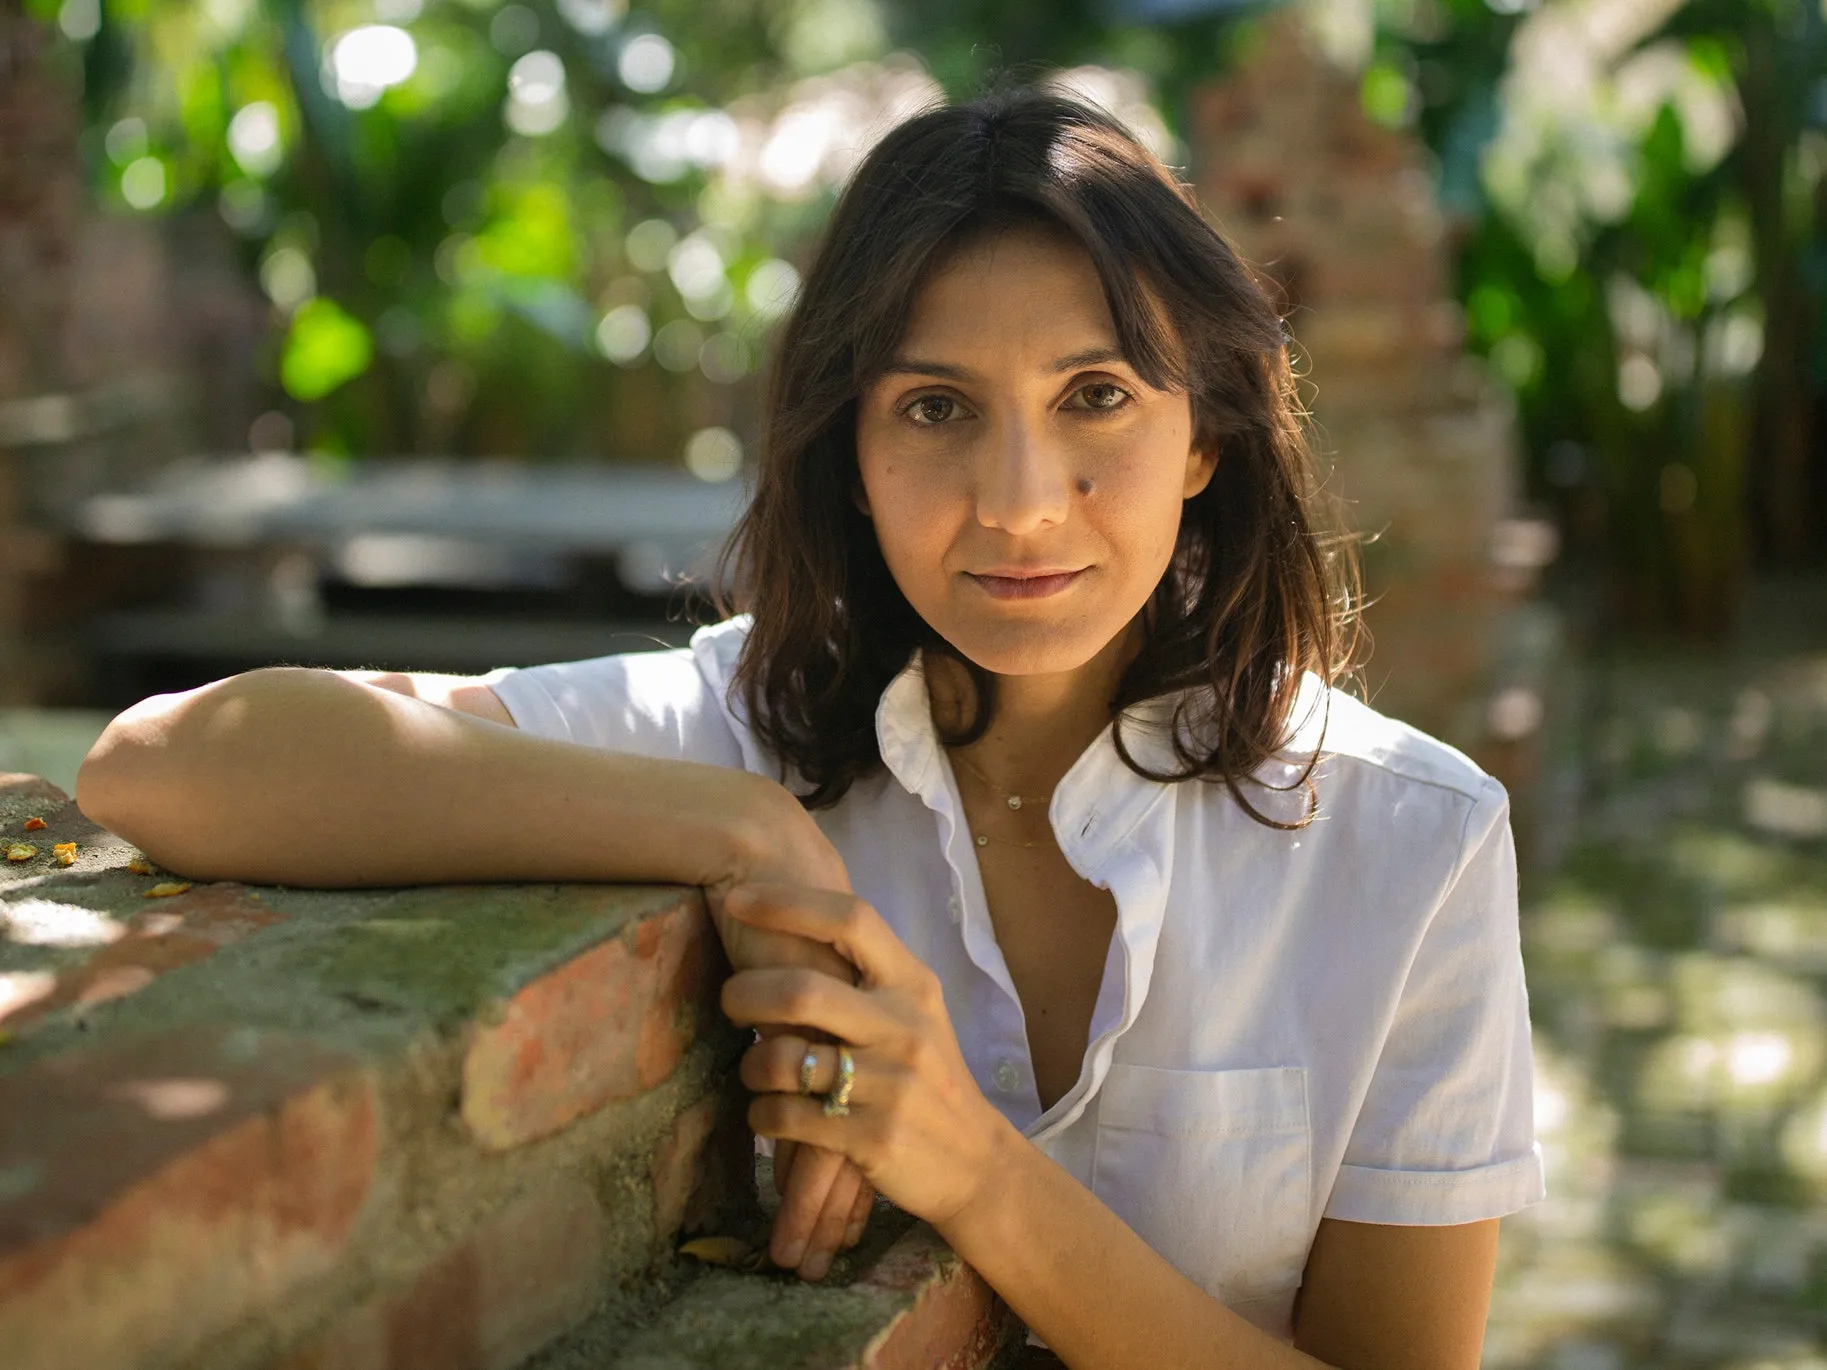 Ottessa Moshfegh's Painful, Funny Novel of a Young Woman's